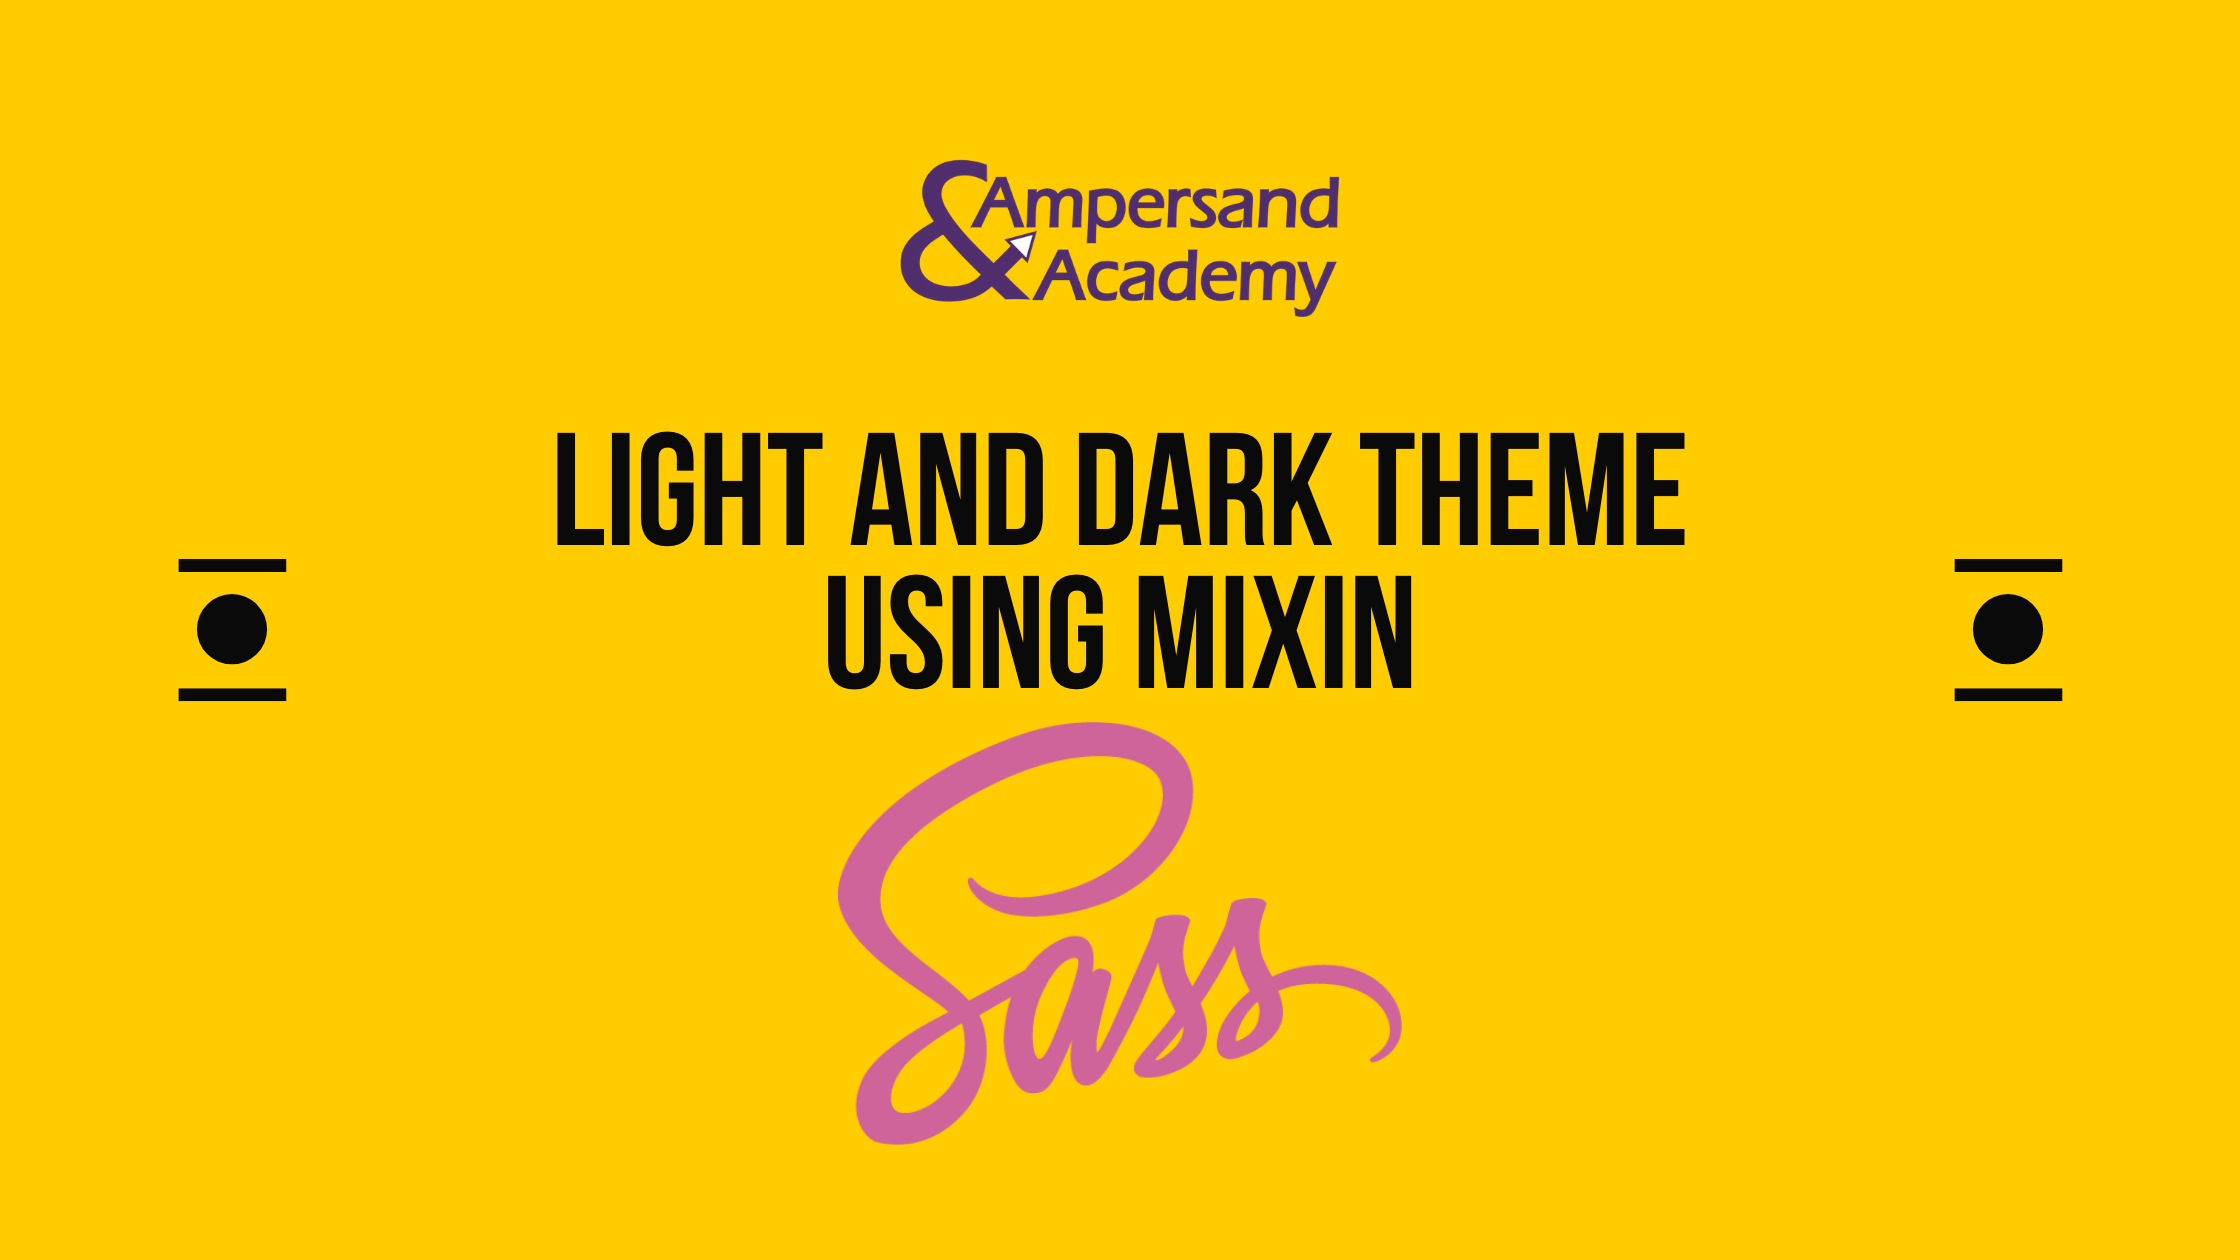 Light and Dark Theme using Mixin. It is possible to switch between